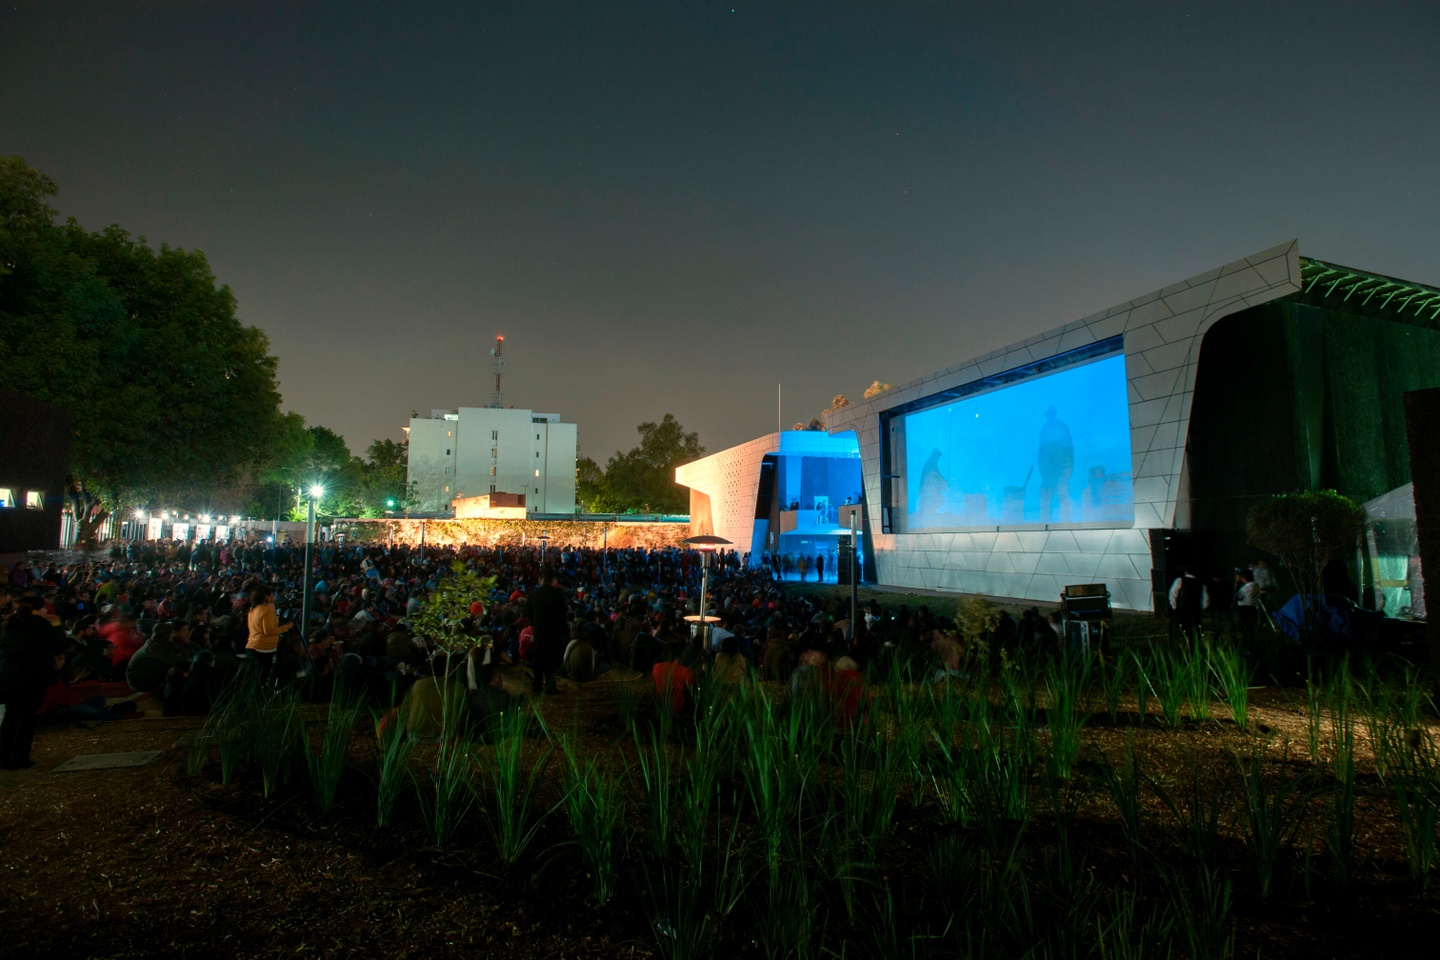 An outdoor forum space at night with hundreds of people sitting on the grass watching the large screen